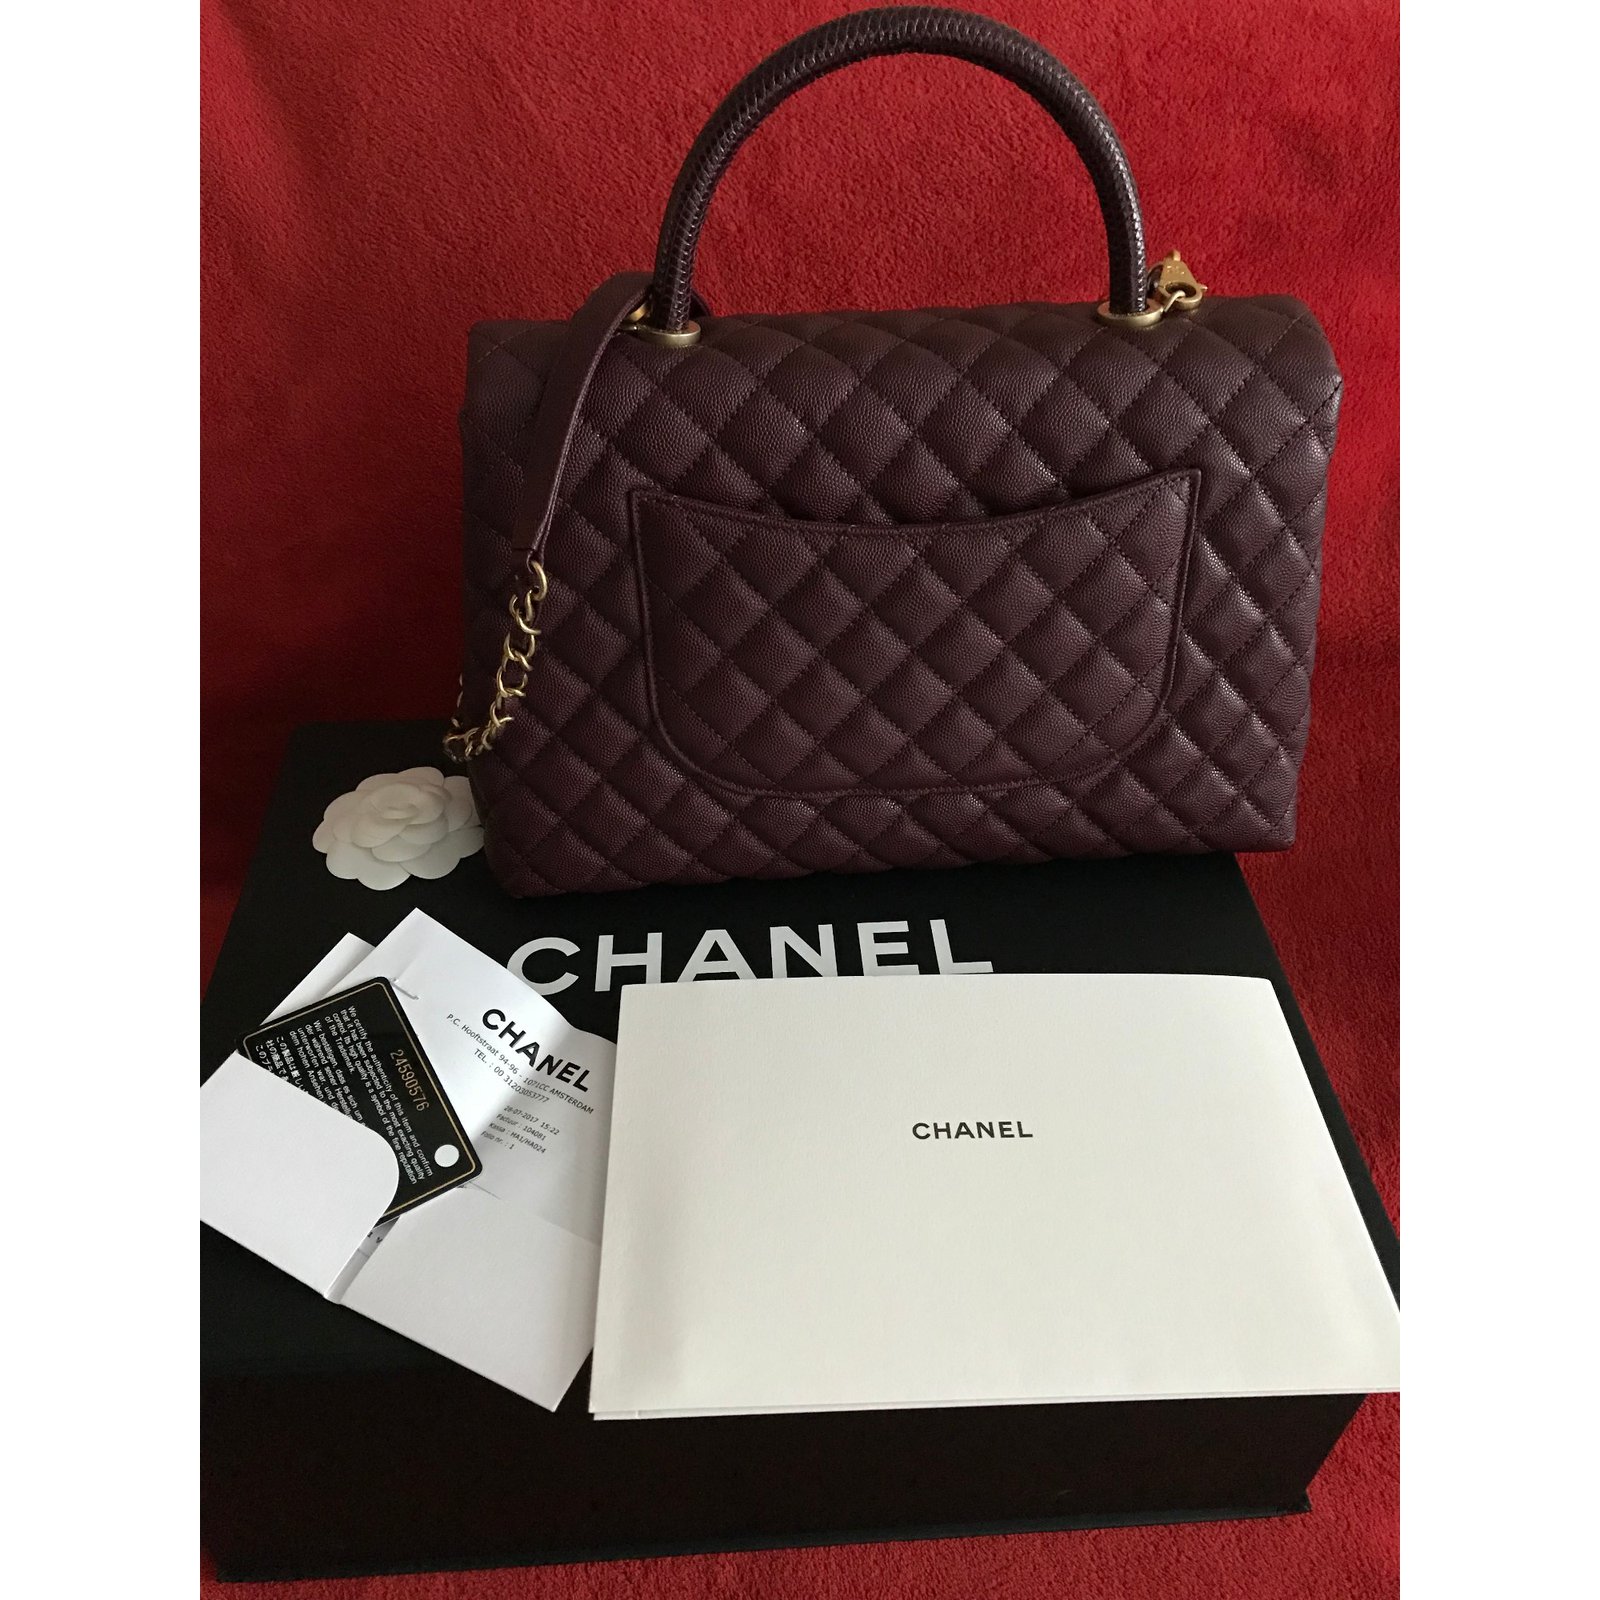 Chanel Red Quilted Caviar Medium Coco Handle Flap Bag